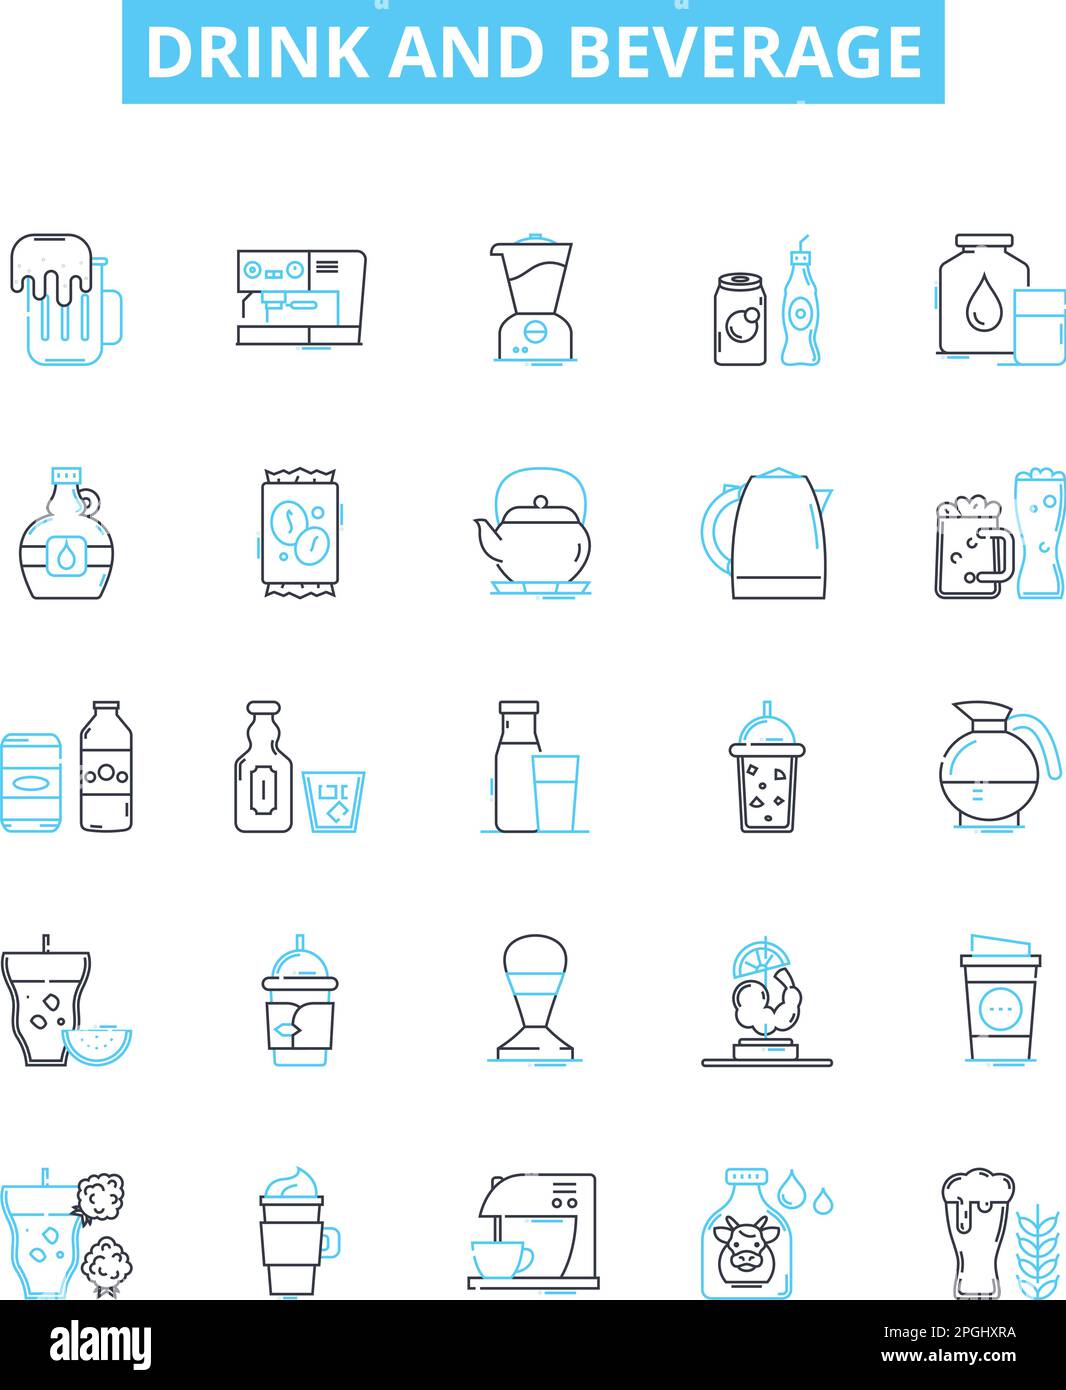 Drink and beverage vector line icons set. Drink, Beverage, Juice, Coffee, Tea, Beer, Wine illustration outline concept symbols and signs Stock Vector